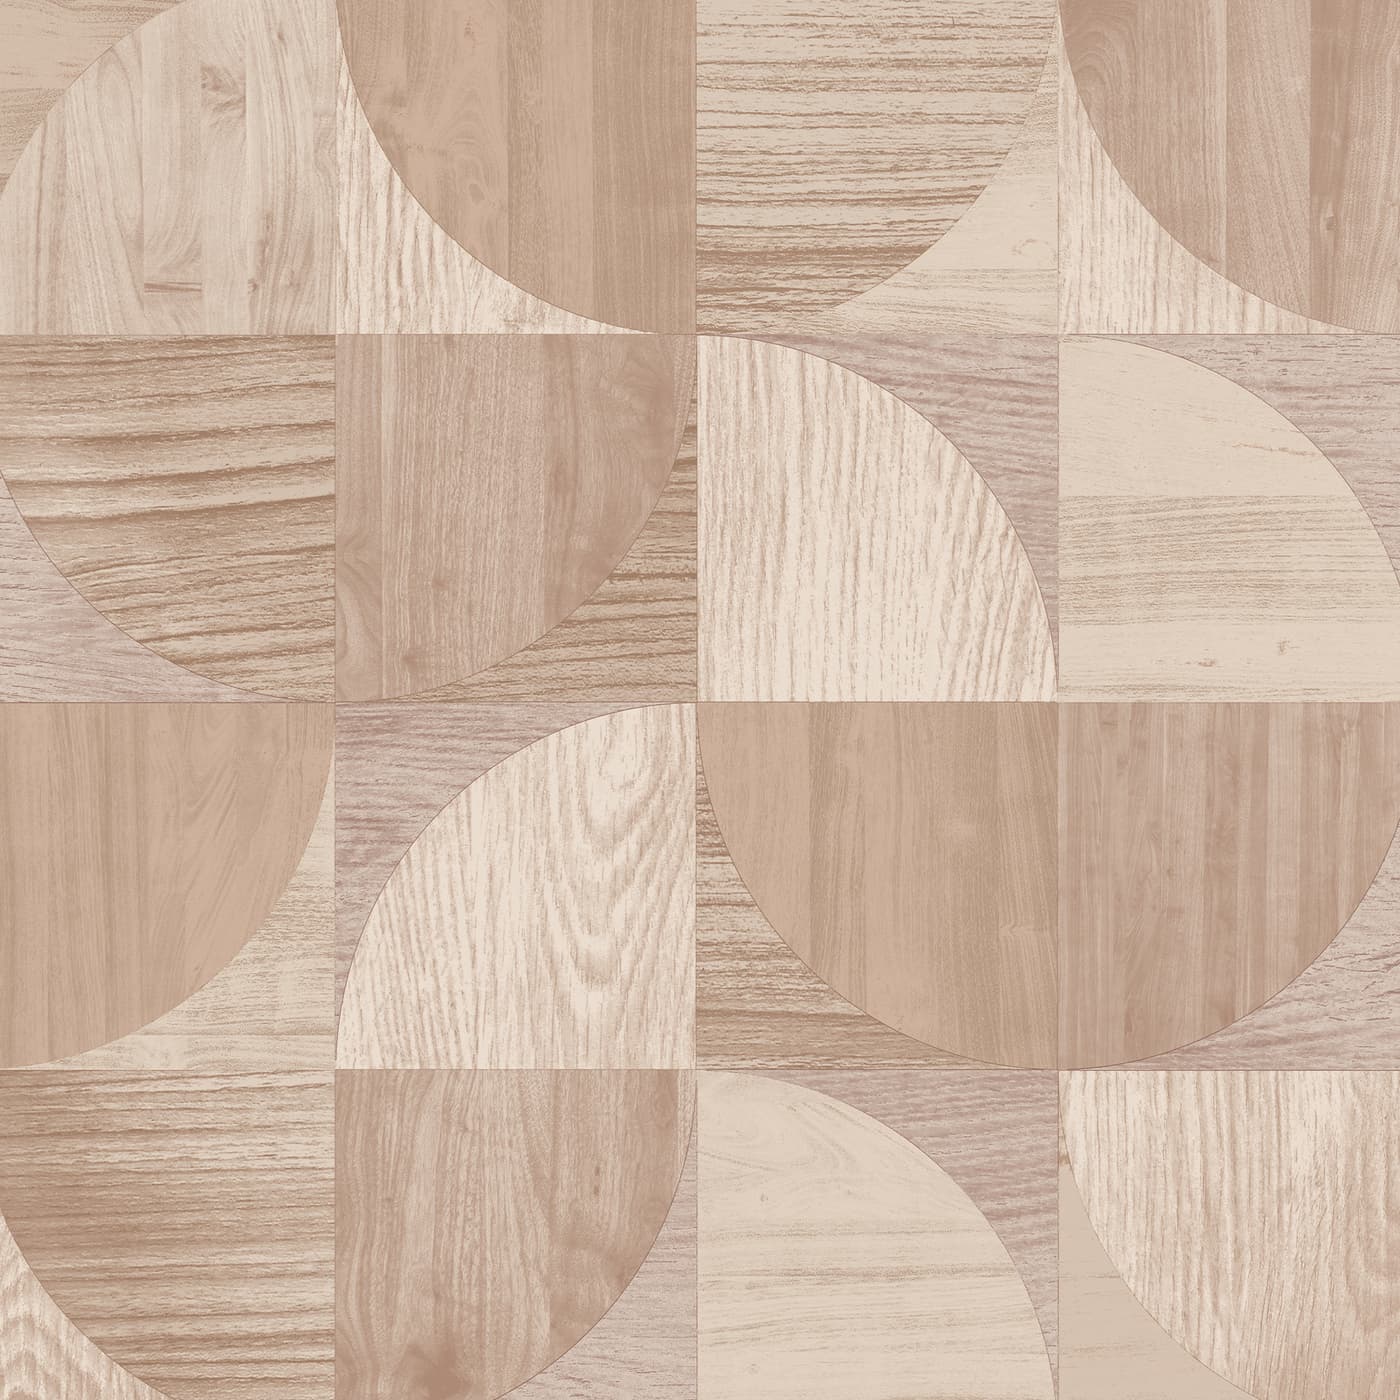 Wood Round Shapes Wallpaper